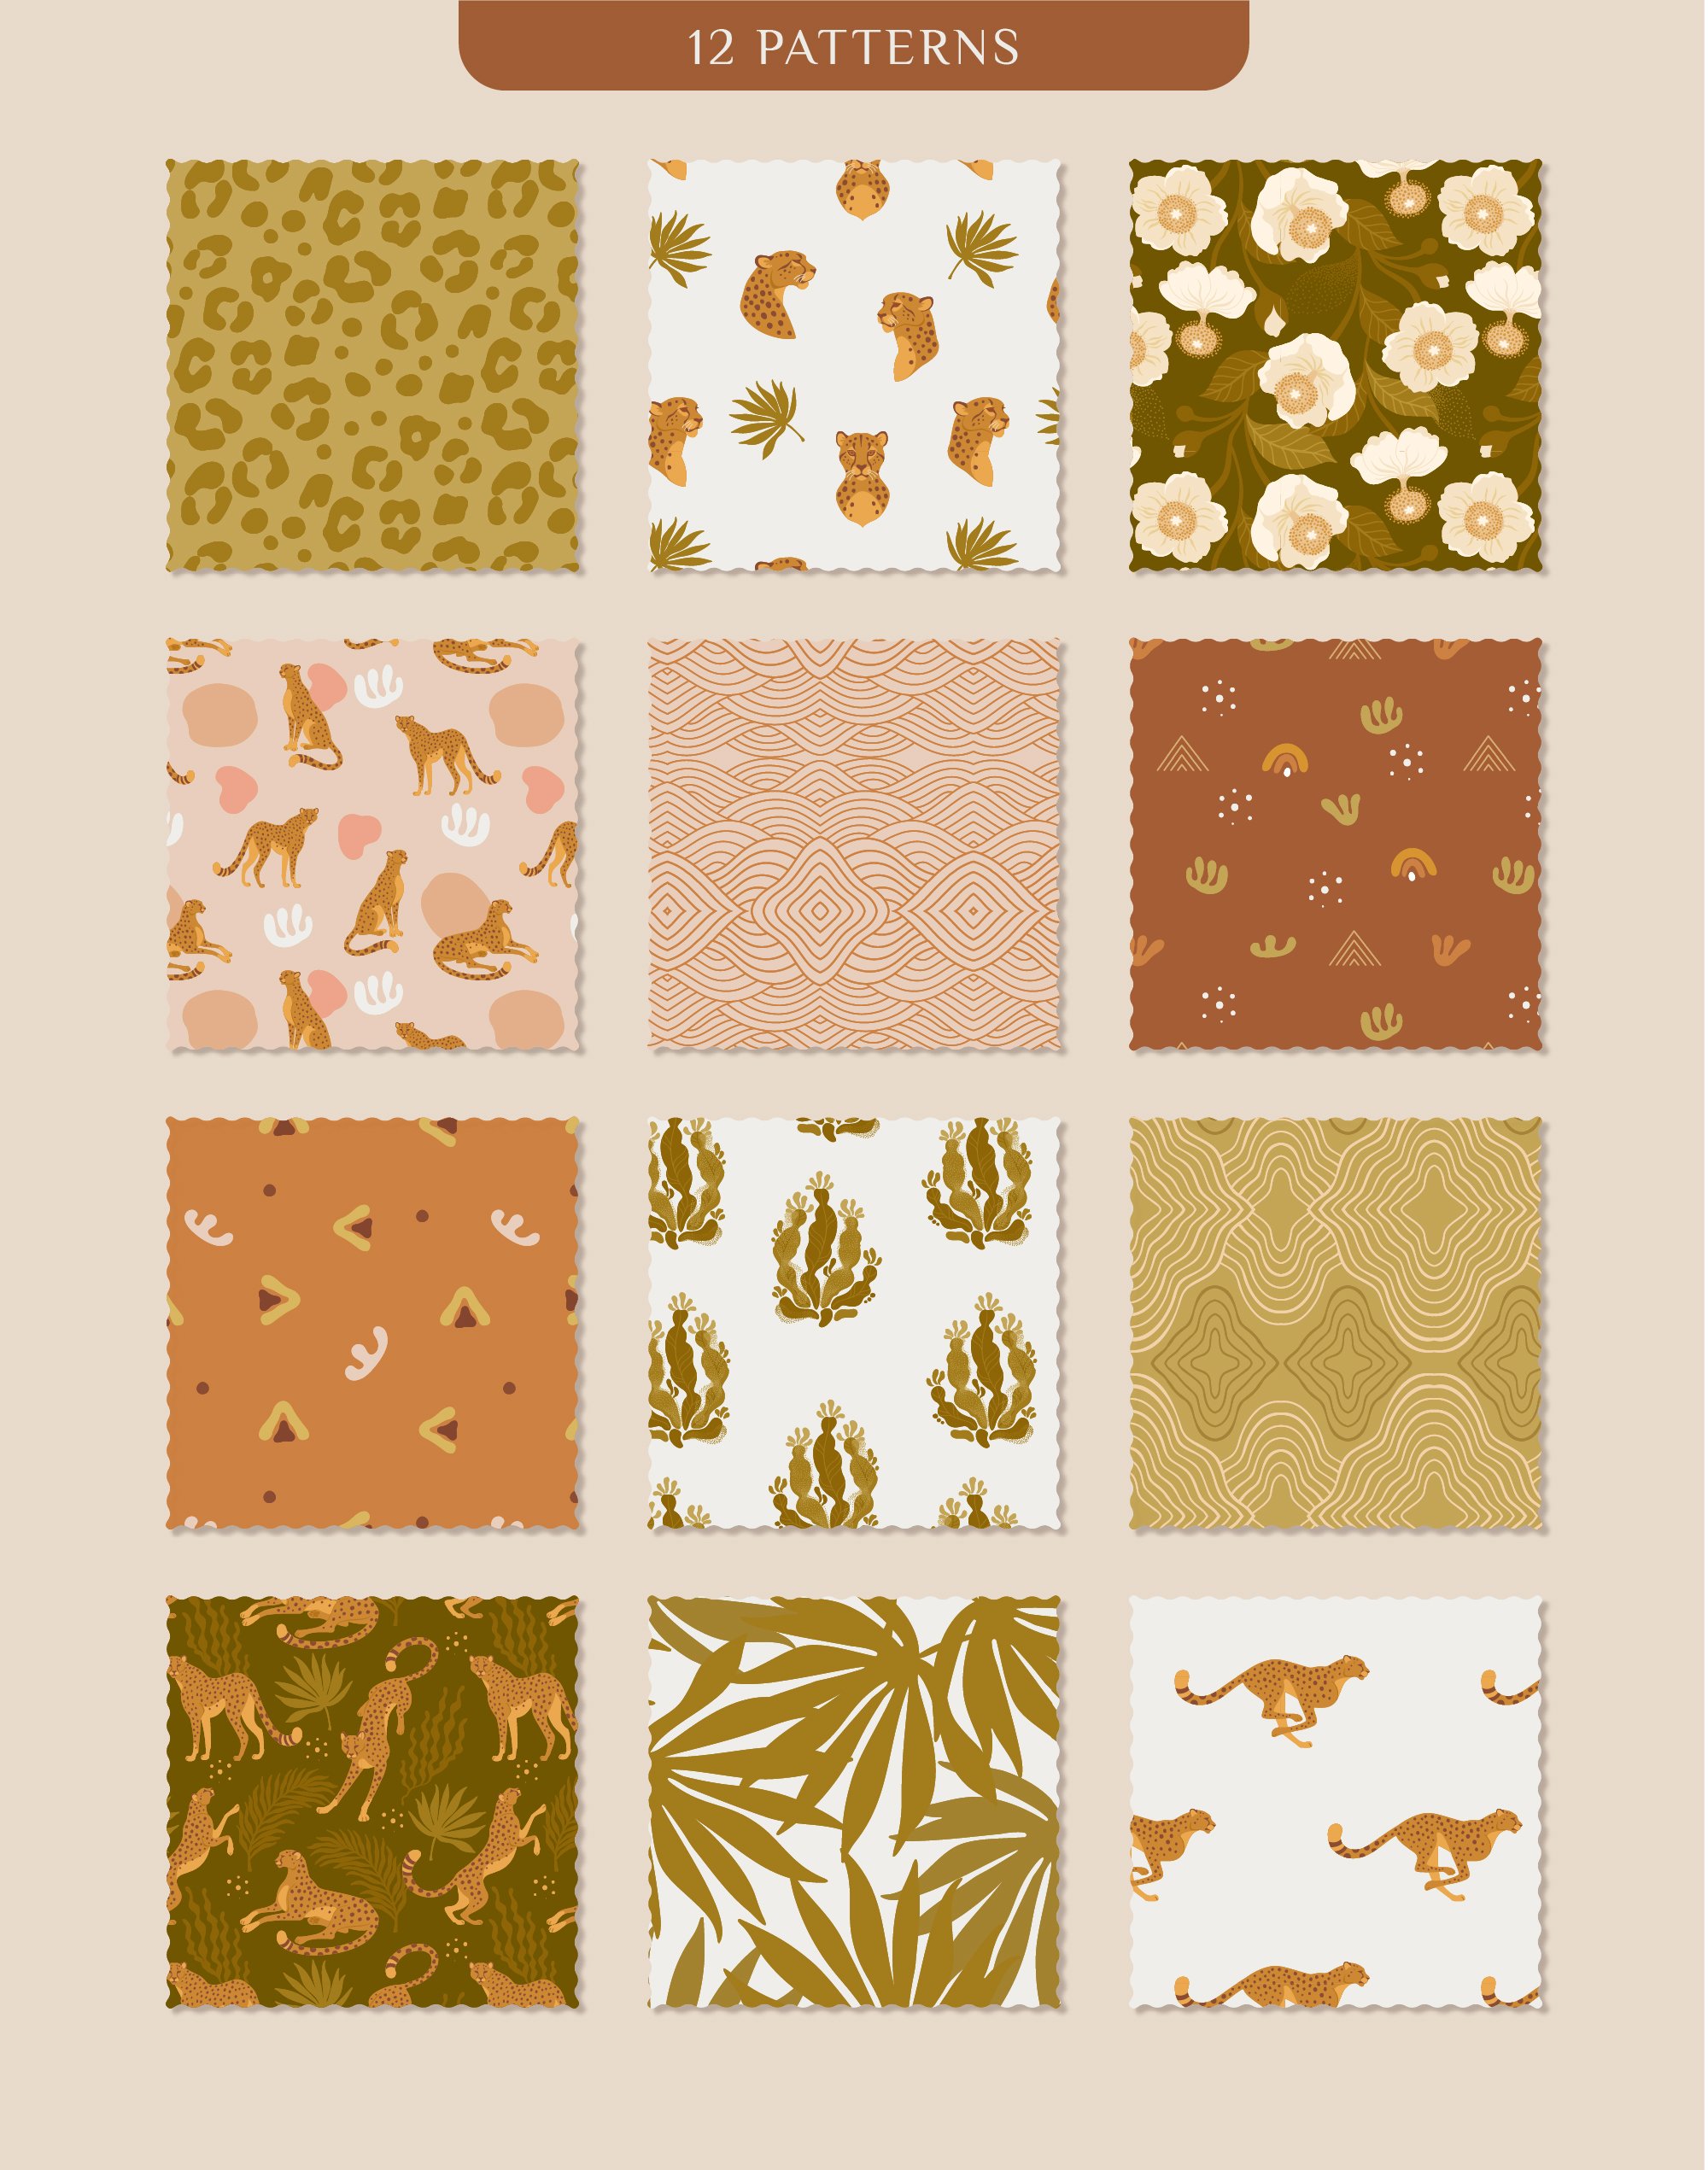 Tropical patterns collection.